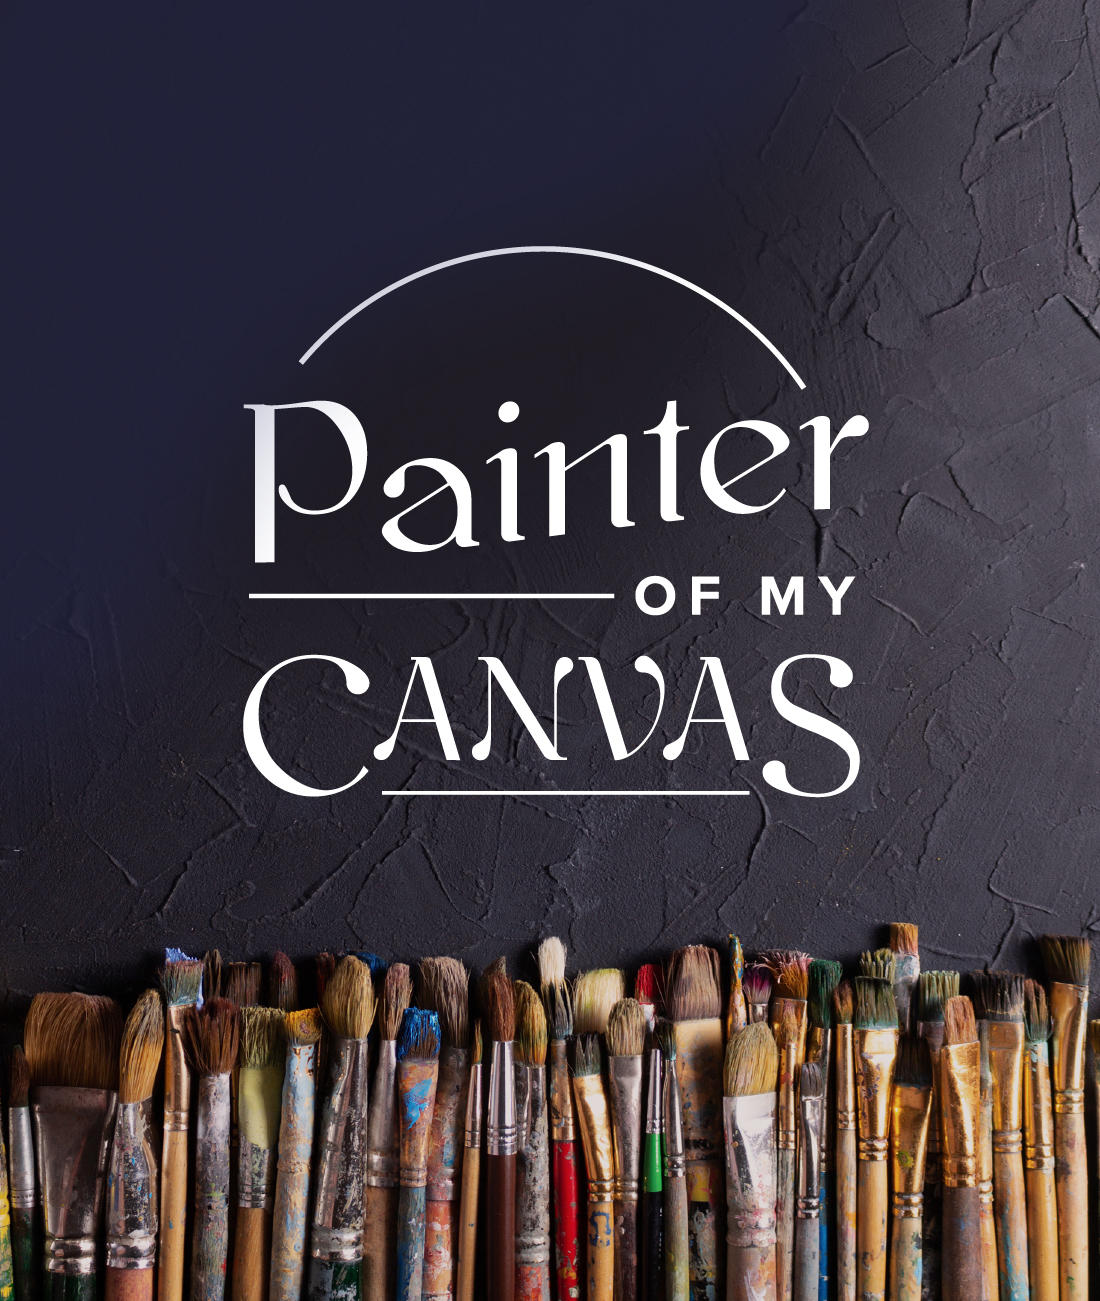 Painter of My Canvas